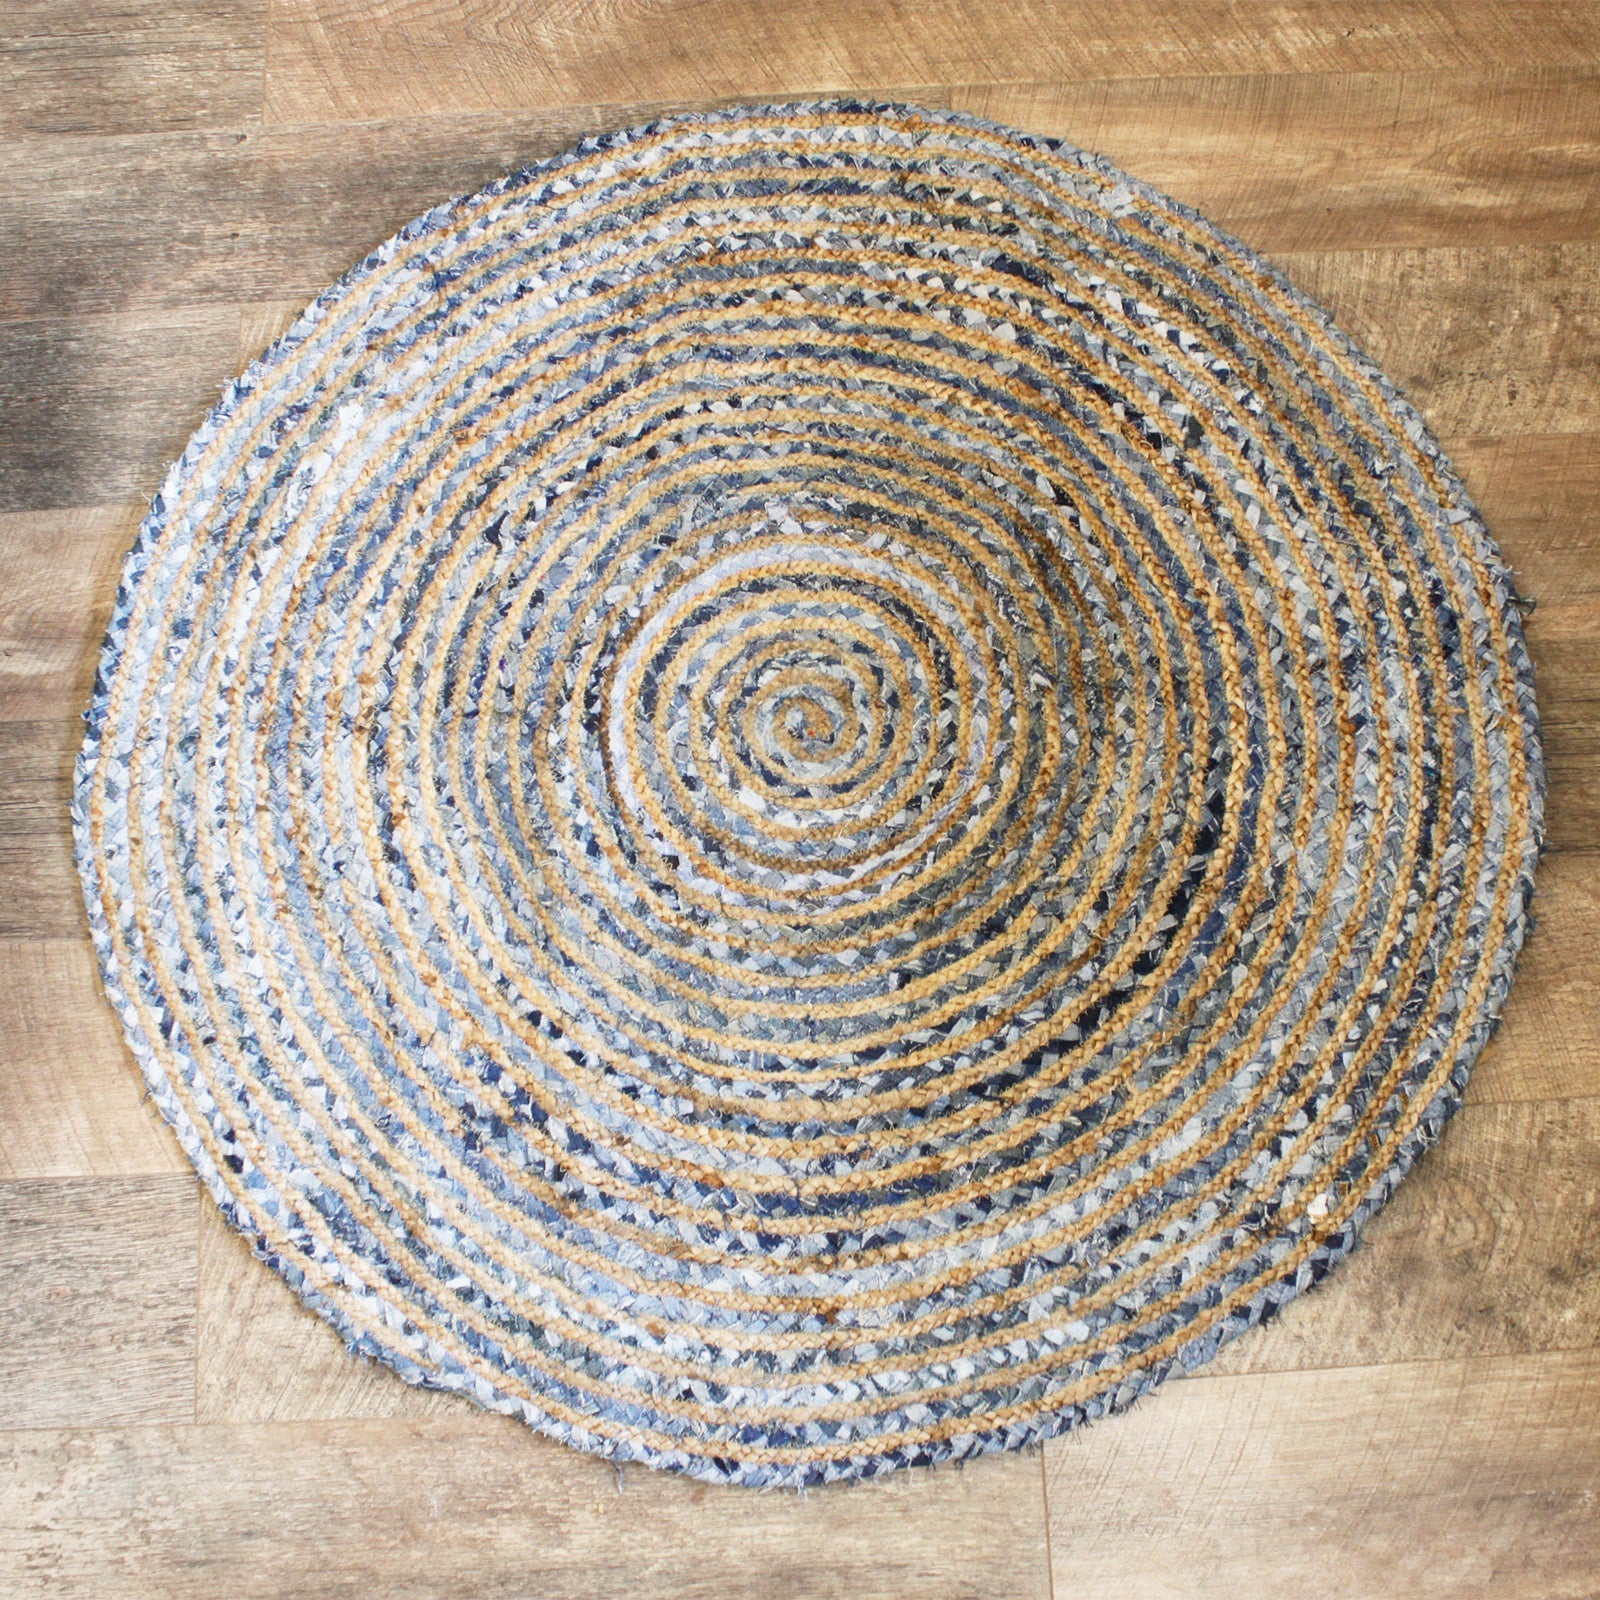 View Round Jute and Recycle Denim Rug 120 cm information